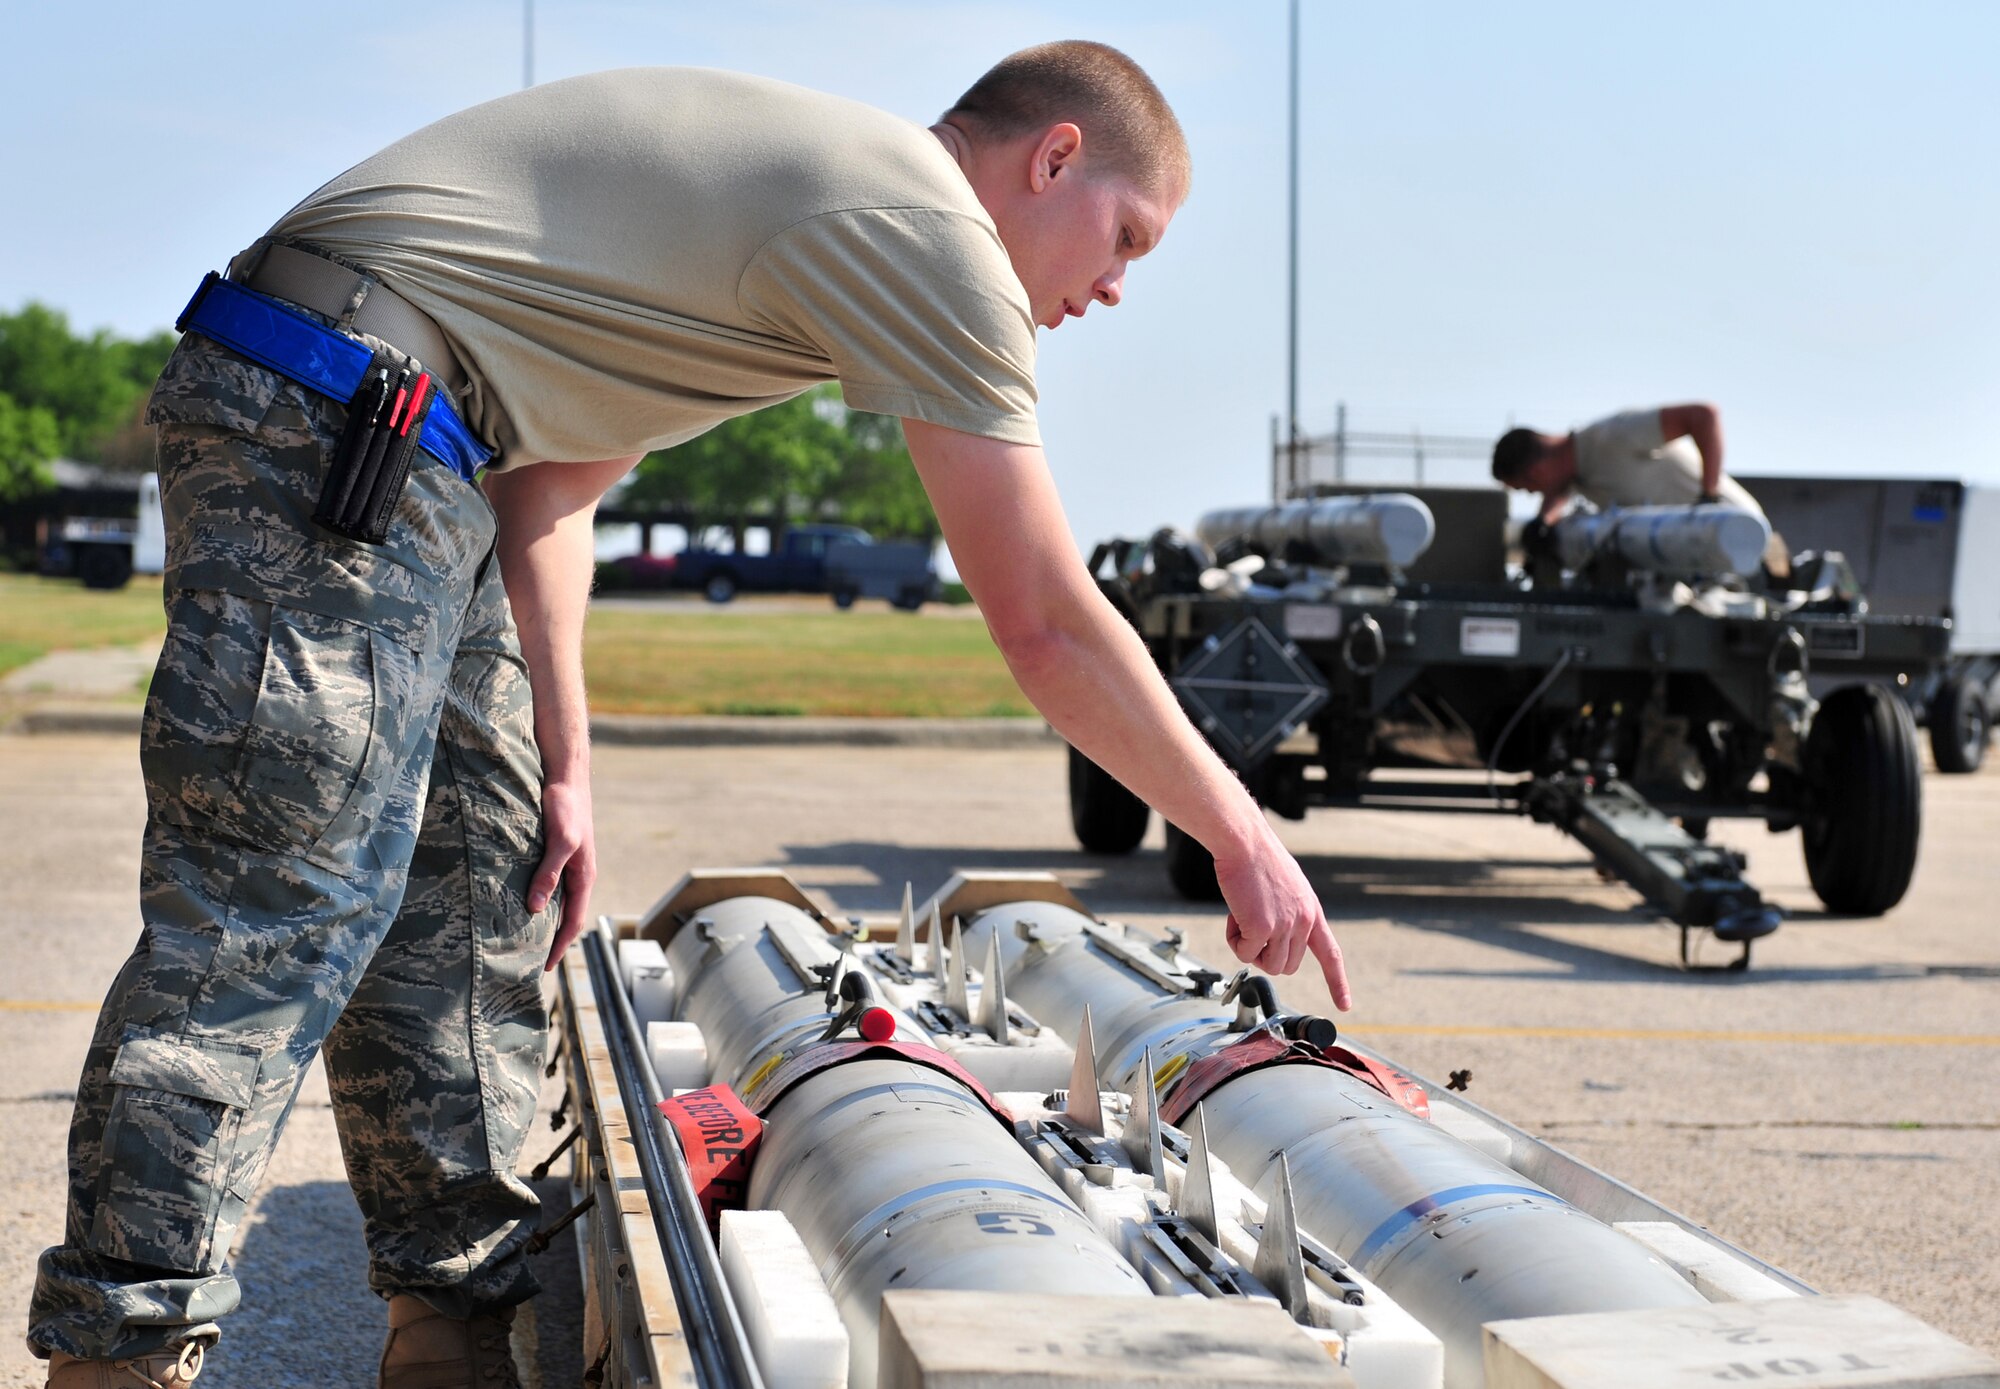 100416-F-8430J-011
SHAW AIR FORCE BASE, S.C. -- Airman 1st Class Ryan Whitehead, 55th Aircraft Maintenance Unit, checks over missiles April 16, 2010. Wing weapons standardization held the first Weapons Load Crew of the Quarter Competition for 2010. The 55th and 79th Aircraft Maintenance Units Weapons load crews competed against each other in a race against time. Both load crews were tasked to load two air intercept missiles (AIM - 120) and two air-to-ground missiles (AGM - 88) within 45 minutes.  (U.S. Air Force photo/Airman 1st Class Amber E. N. Jacobs)
